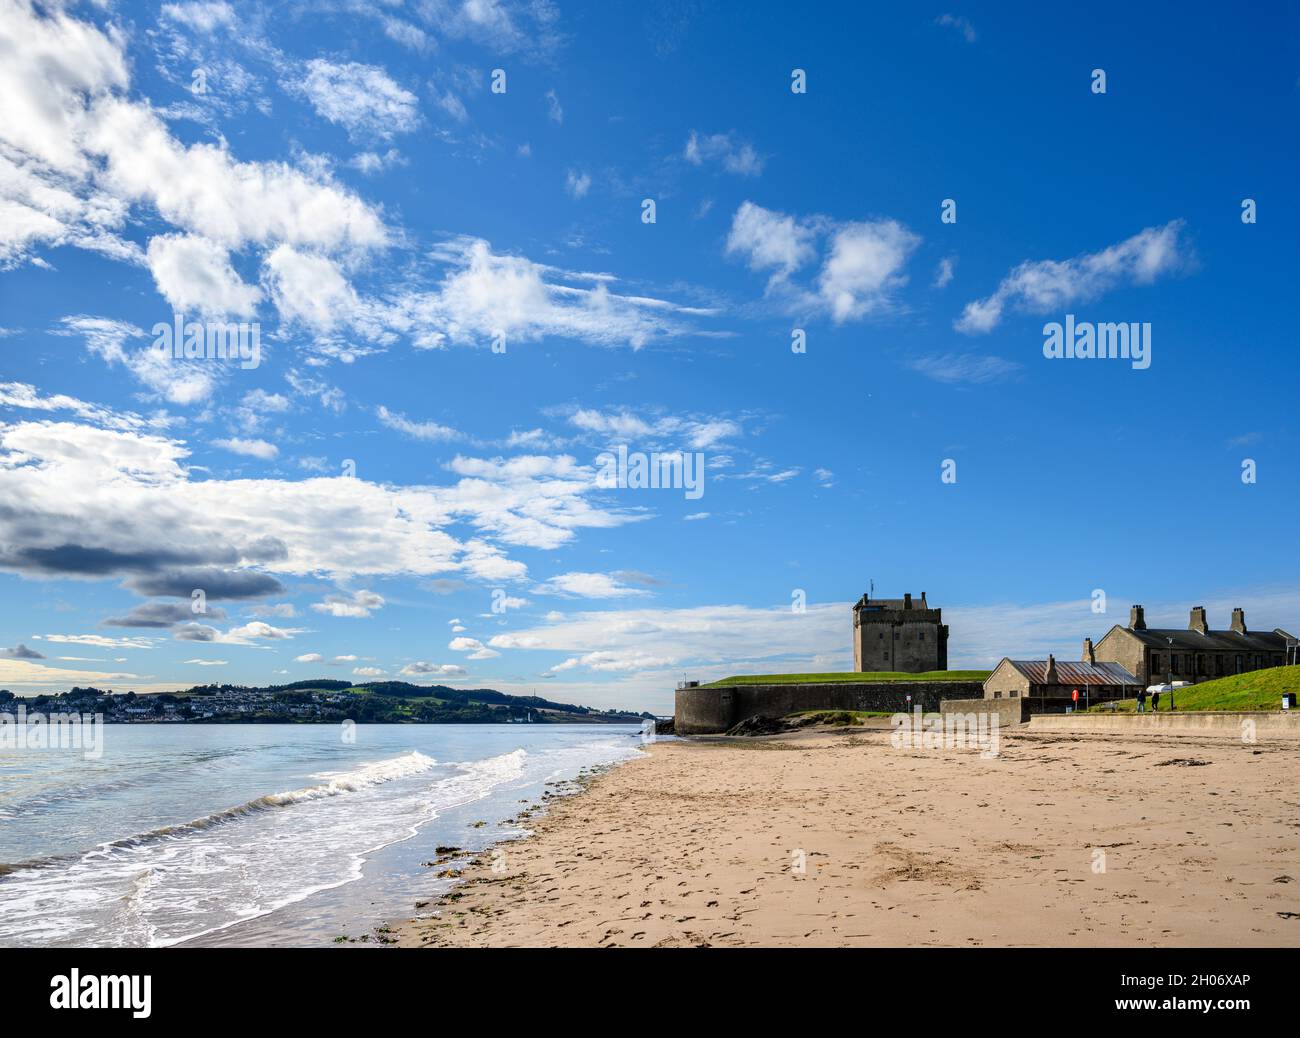 Broughty Castle, Broughty Ferry, near Dundee, Scotland, UK Stock Photo